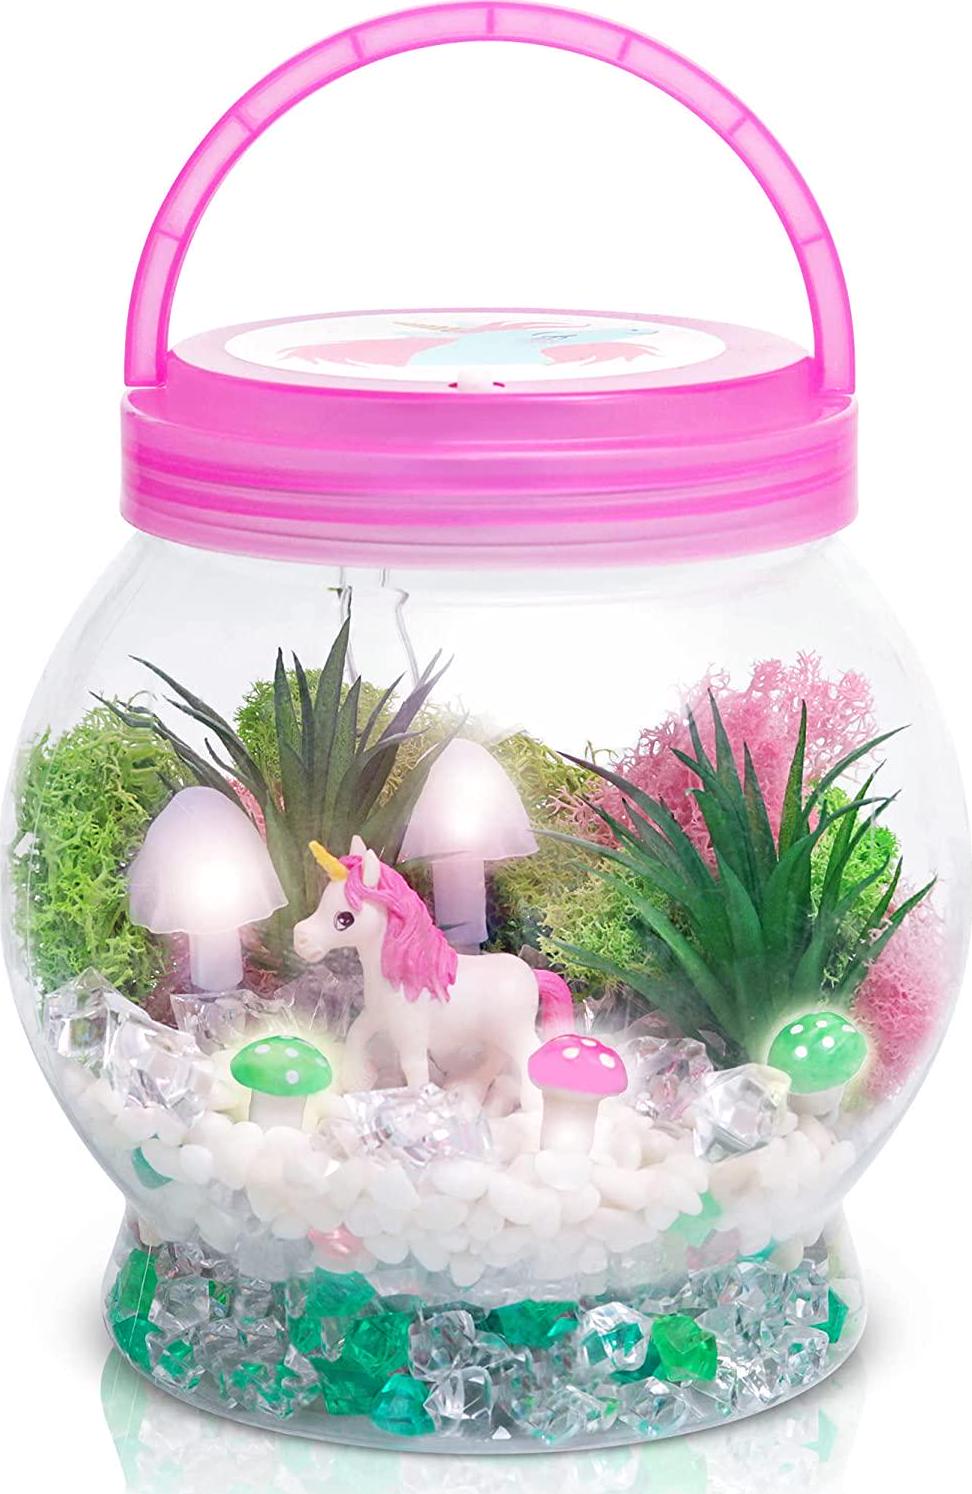 Amitié Lane, Light Up Unicorn Terrarium Kit for Kids - Unicorns Gifts for Girls - Birthday Unicorn Toys, Arts and Crafts Kits, STEM, Garden Activities, Girl Gifts For 5 Year Old Girl and Ages 6 7 8-10